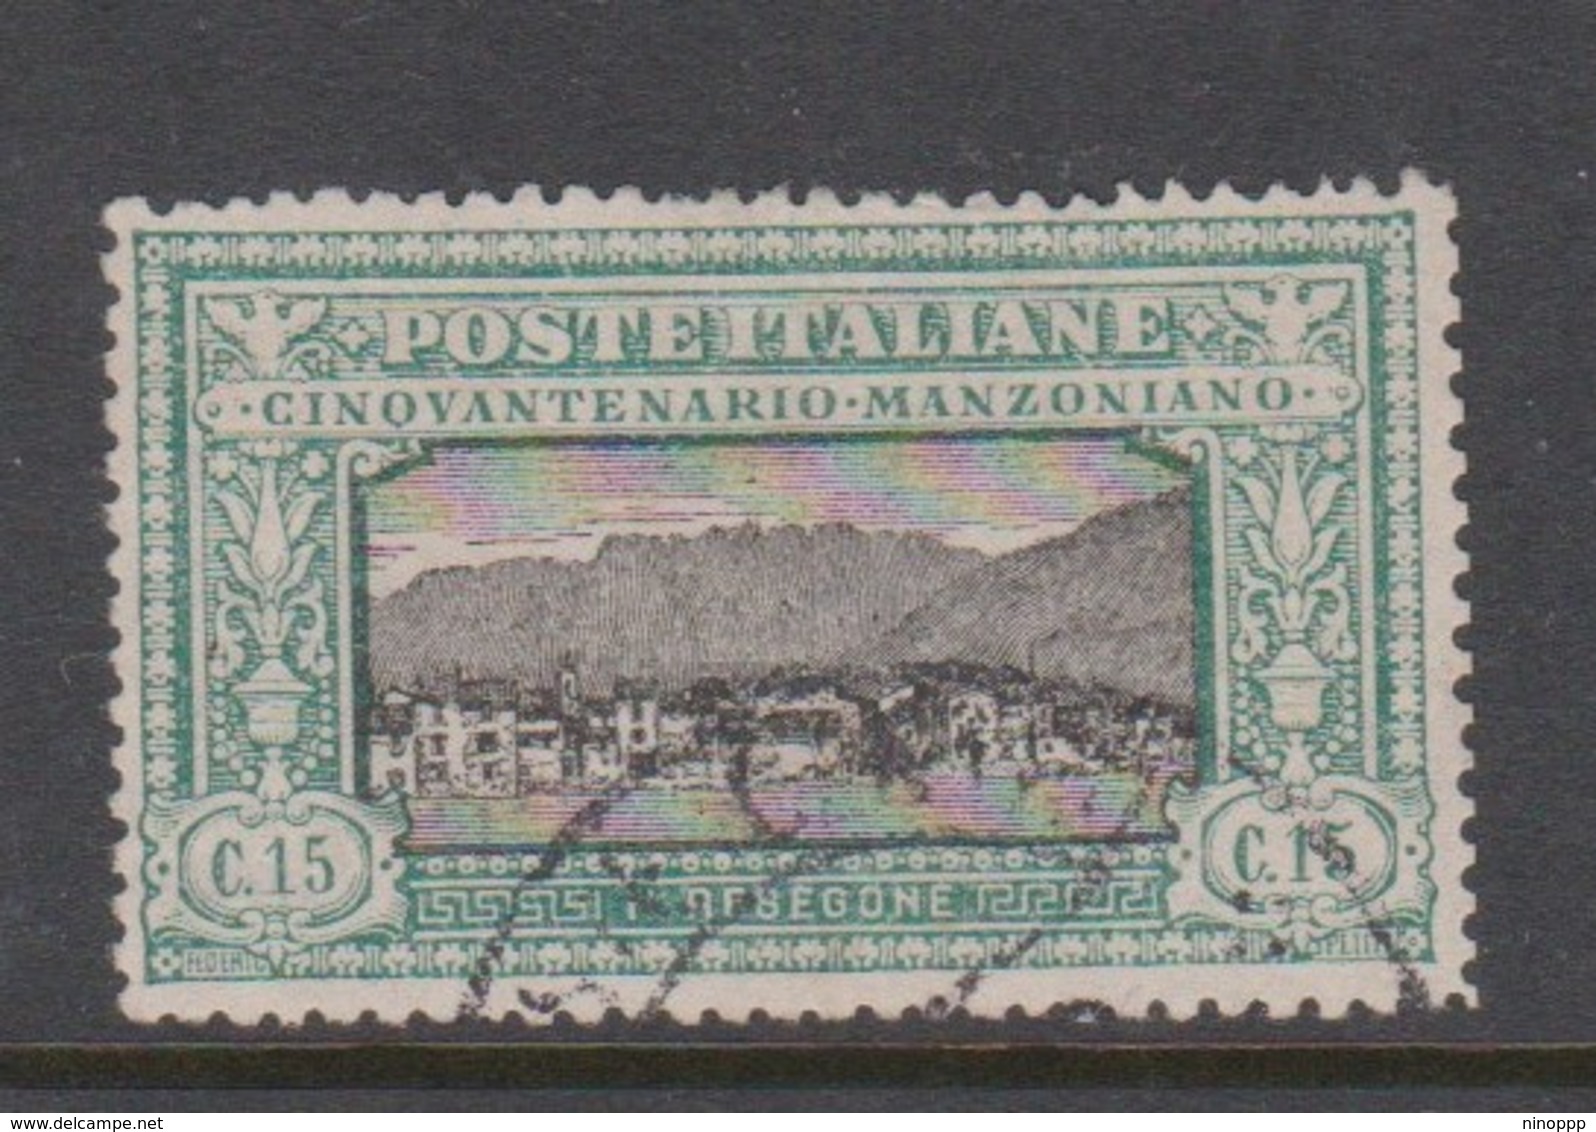 Italy S 152 1923 50th Anniversary Death Of Manzoni, 15c Green And Black, Used - Used